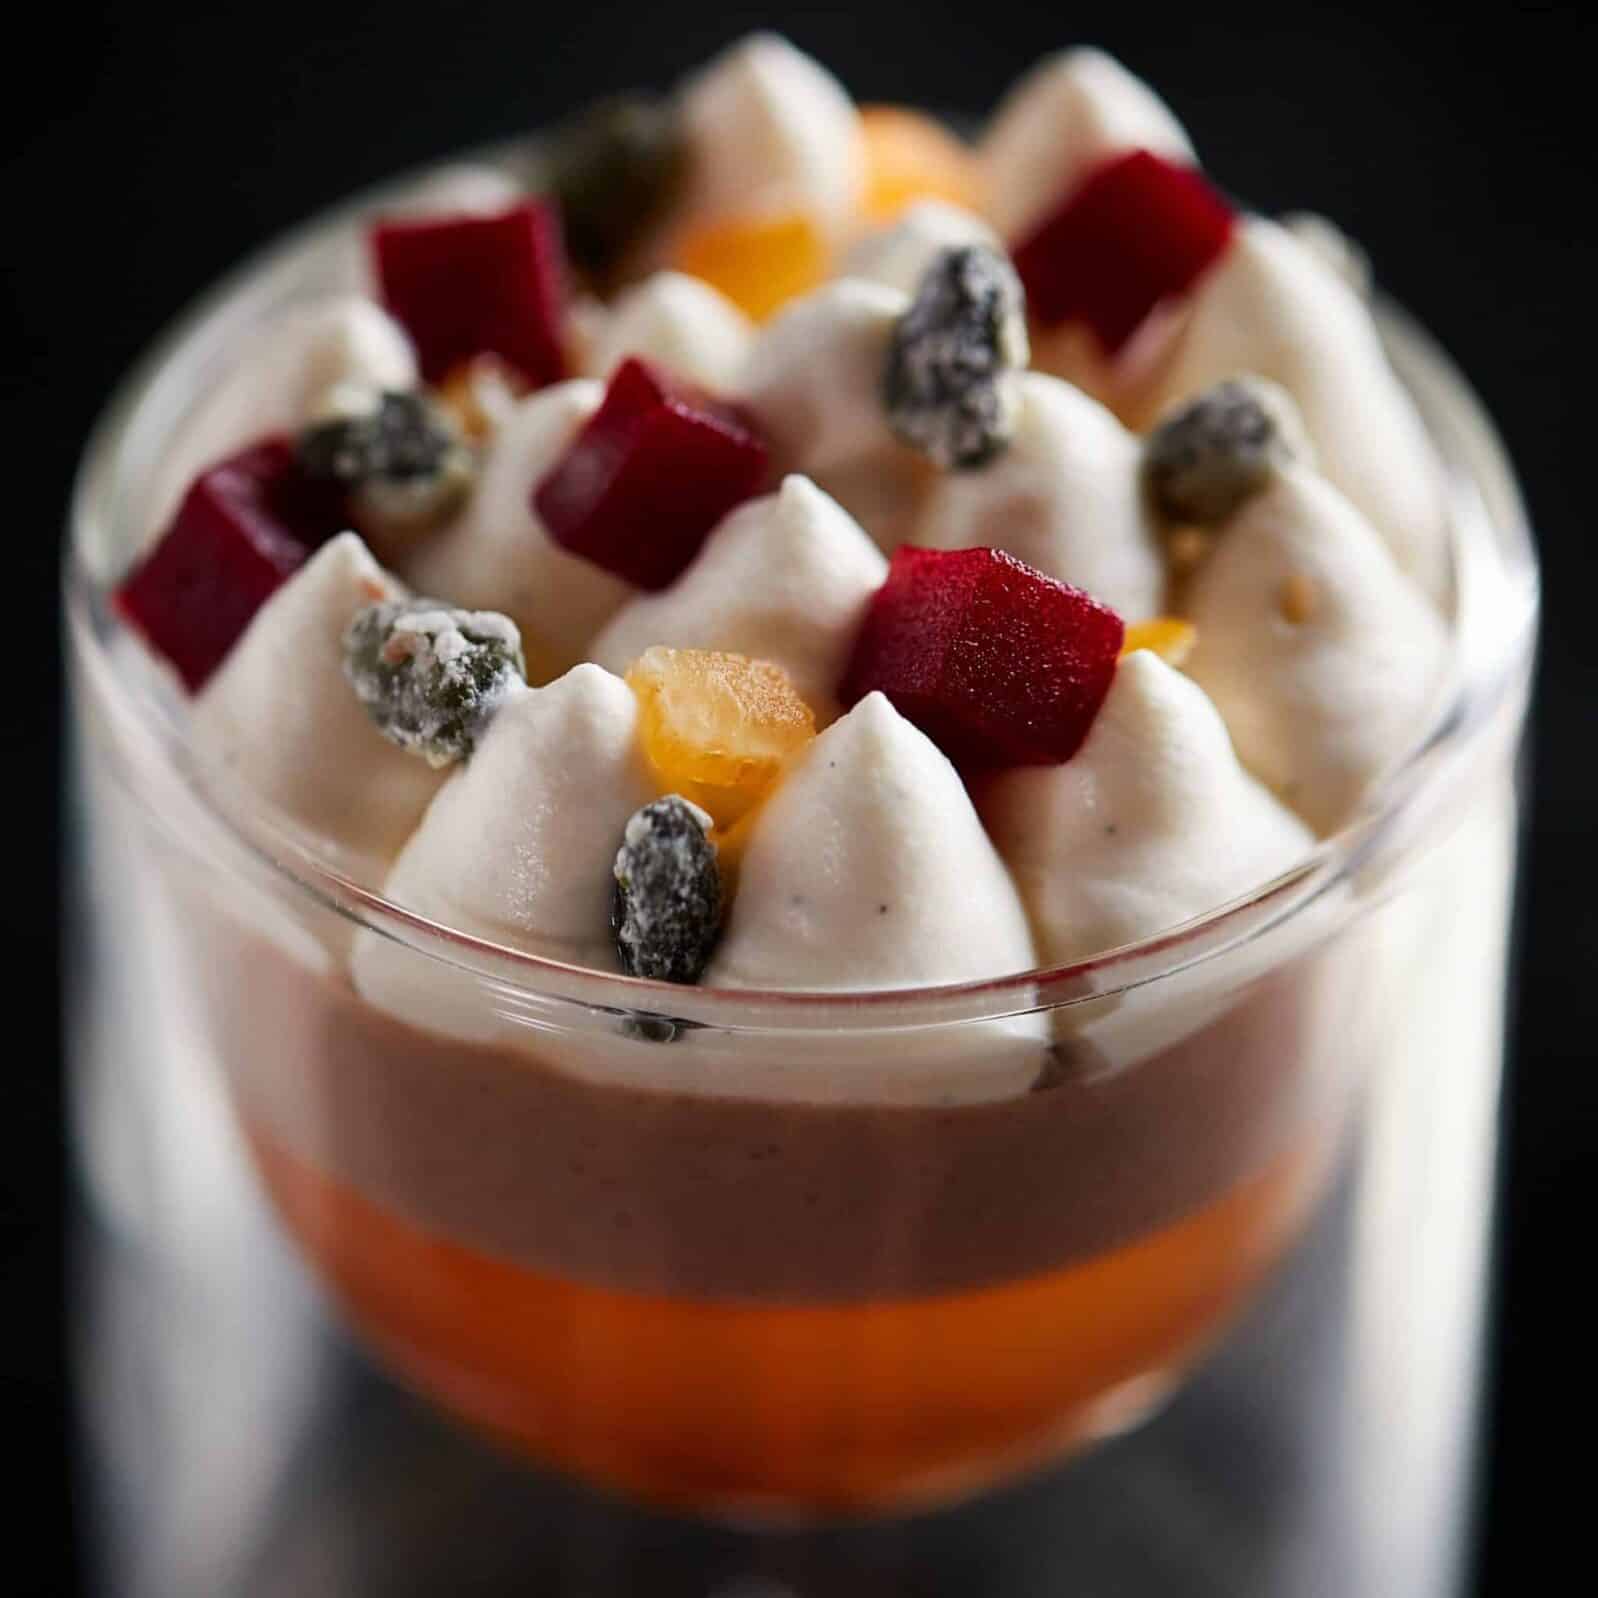 Image of a fruit compot dessert with whipped cream and dried fruit on top